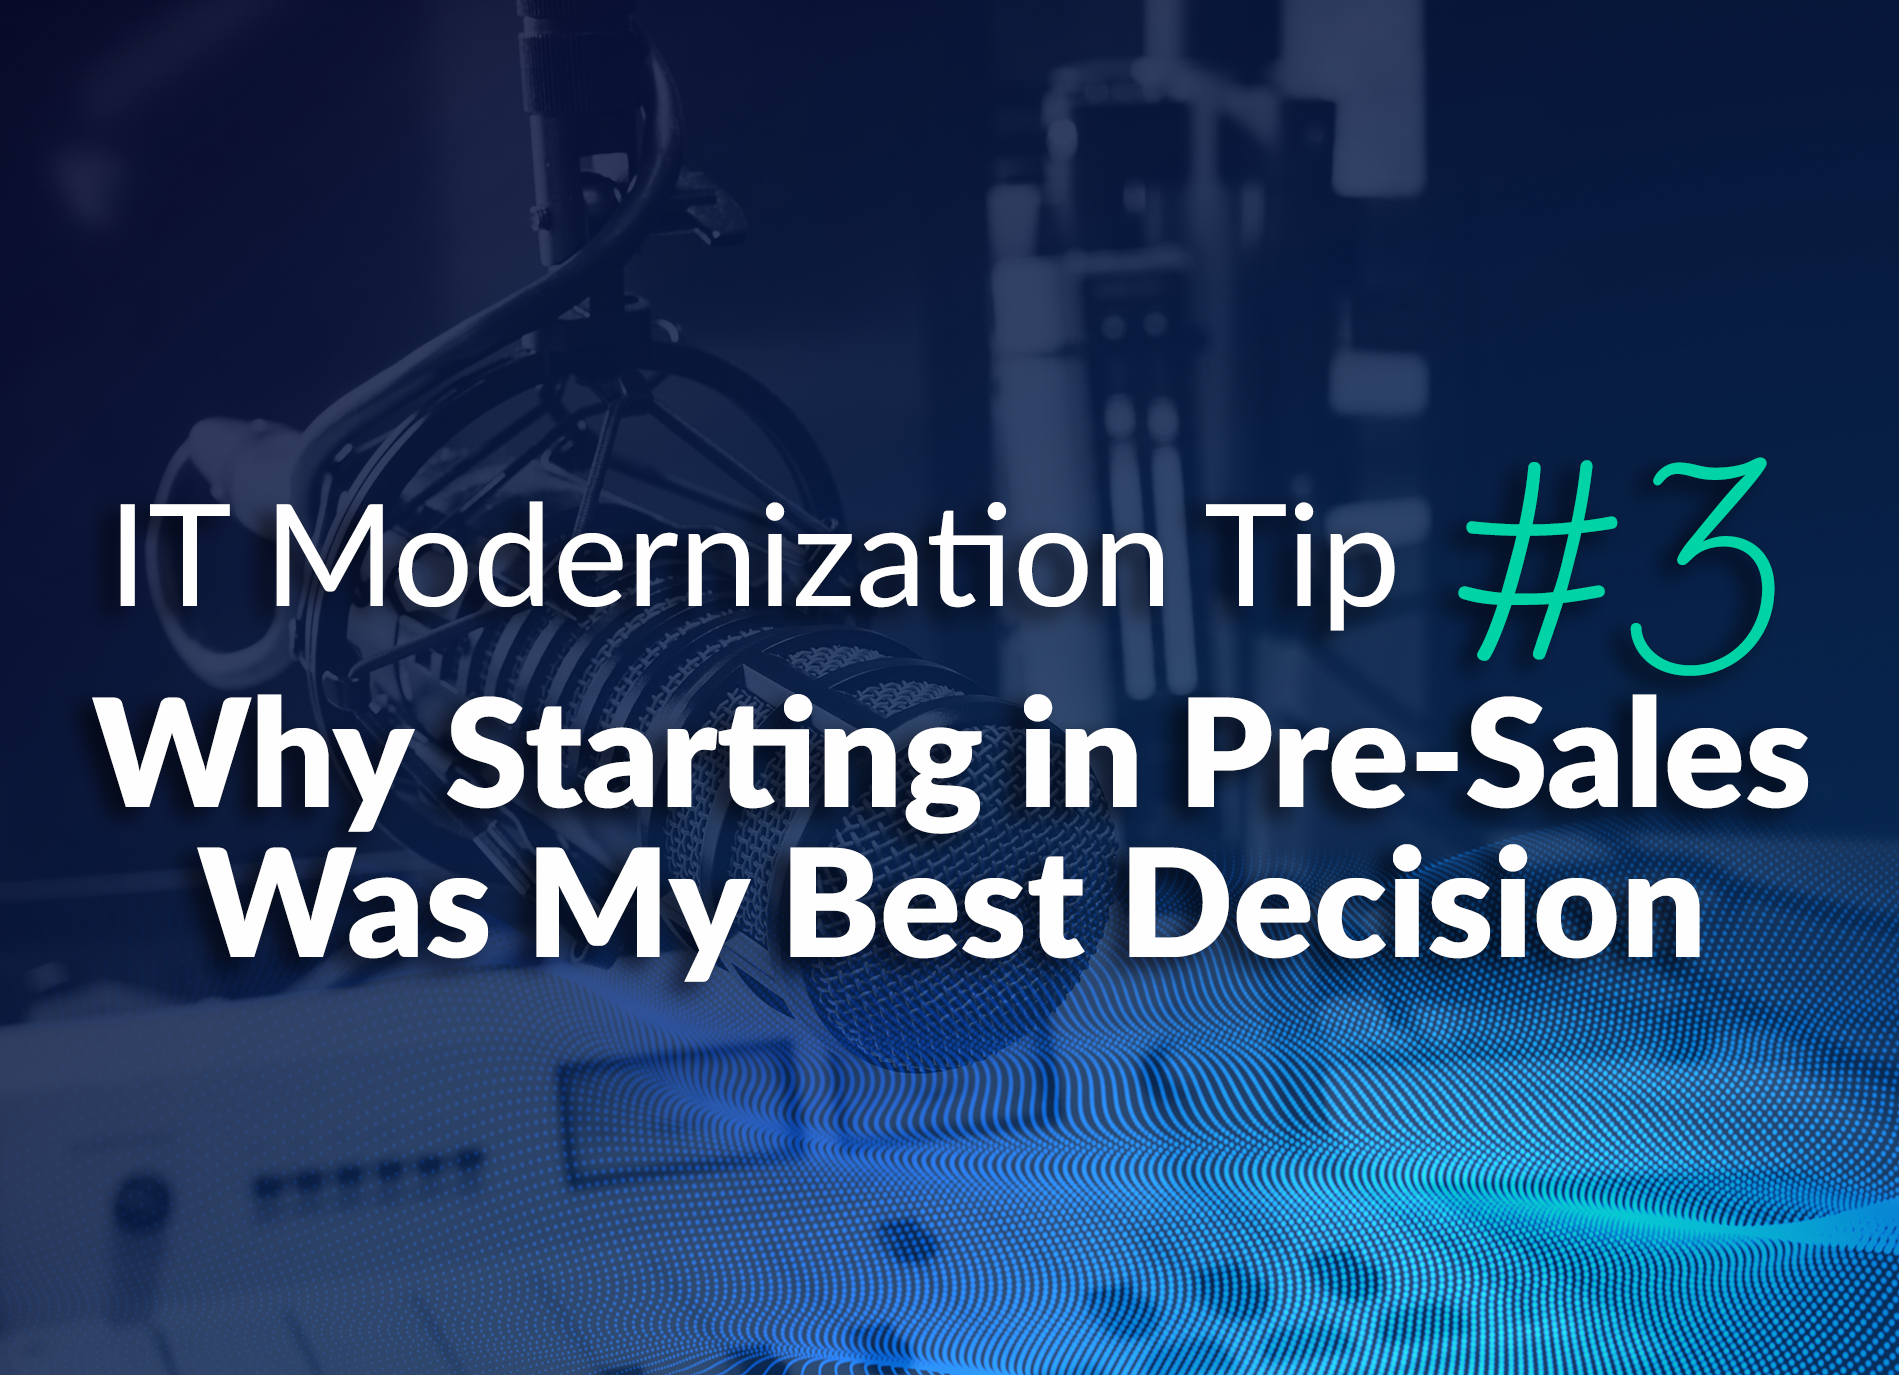 IT Modernization Tip #3: Why Starting in Pre-Sales Was My Best Decision